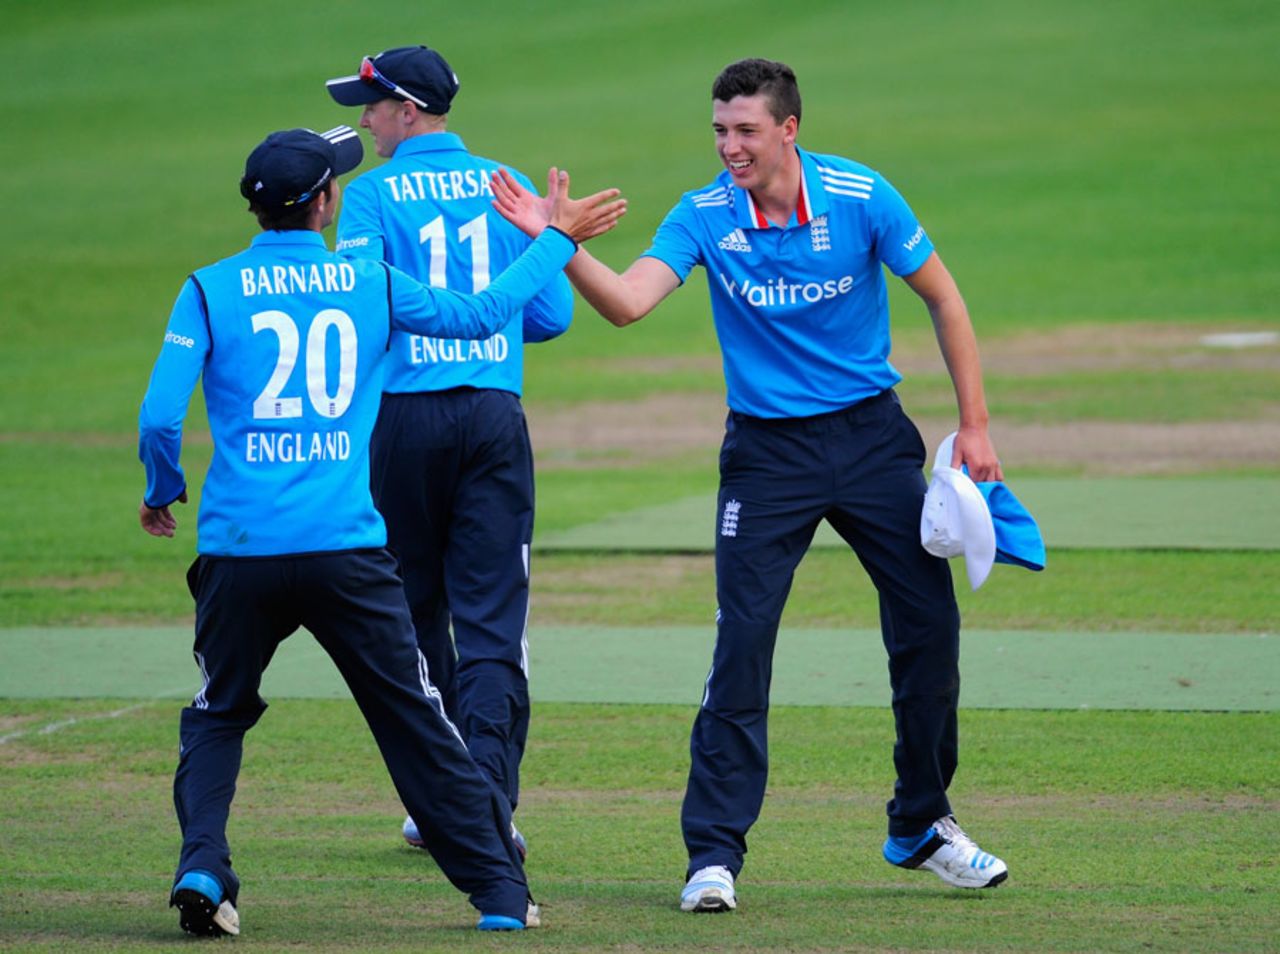 Matthew Fisher picked up a couple of wickets, England U-19s v South Africa U-19s, 1st Youth ODI, Edgbaston, August 15, 2014